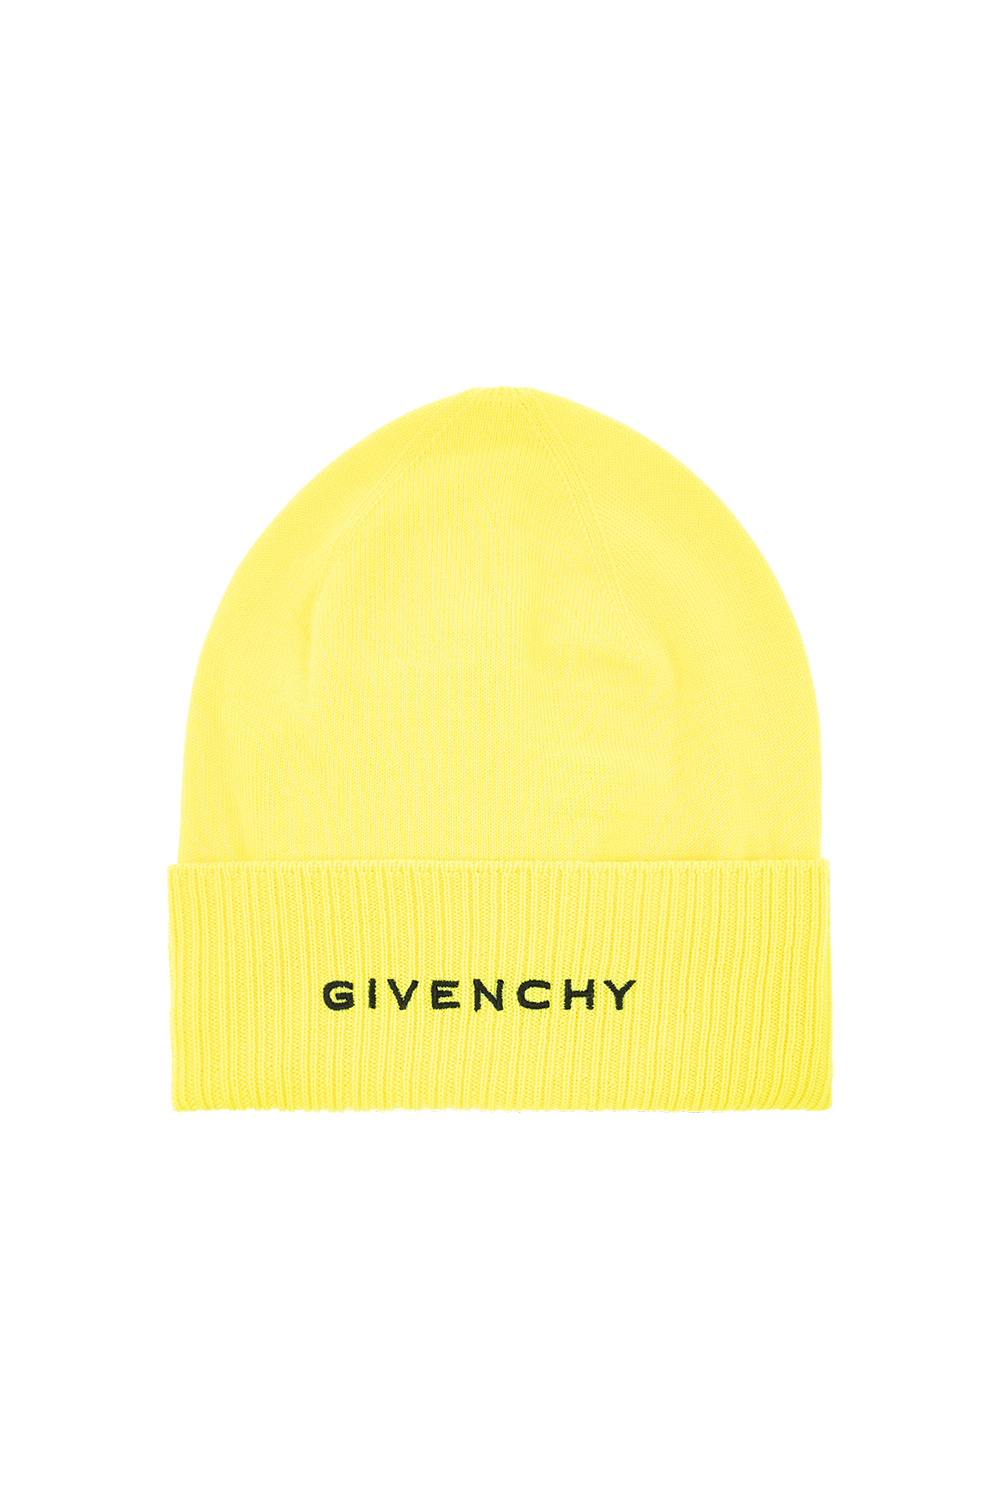 givenchy long-sleeved Wool beanie